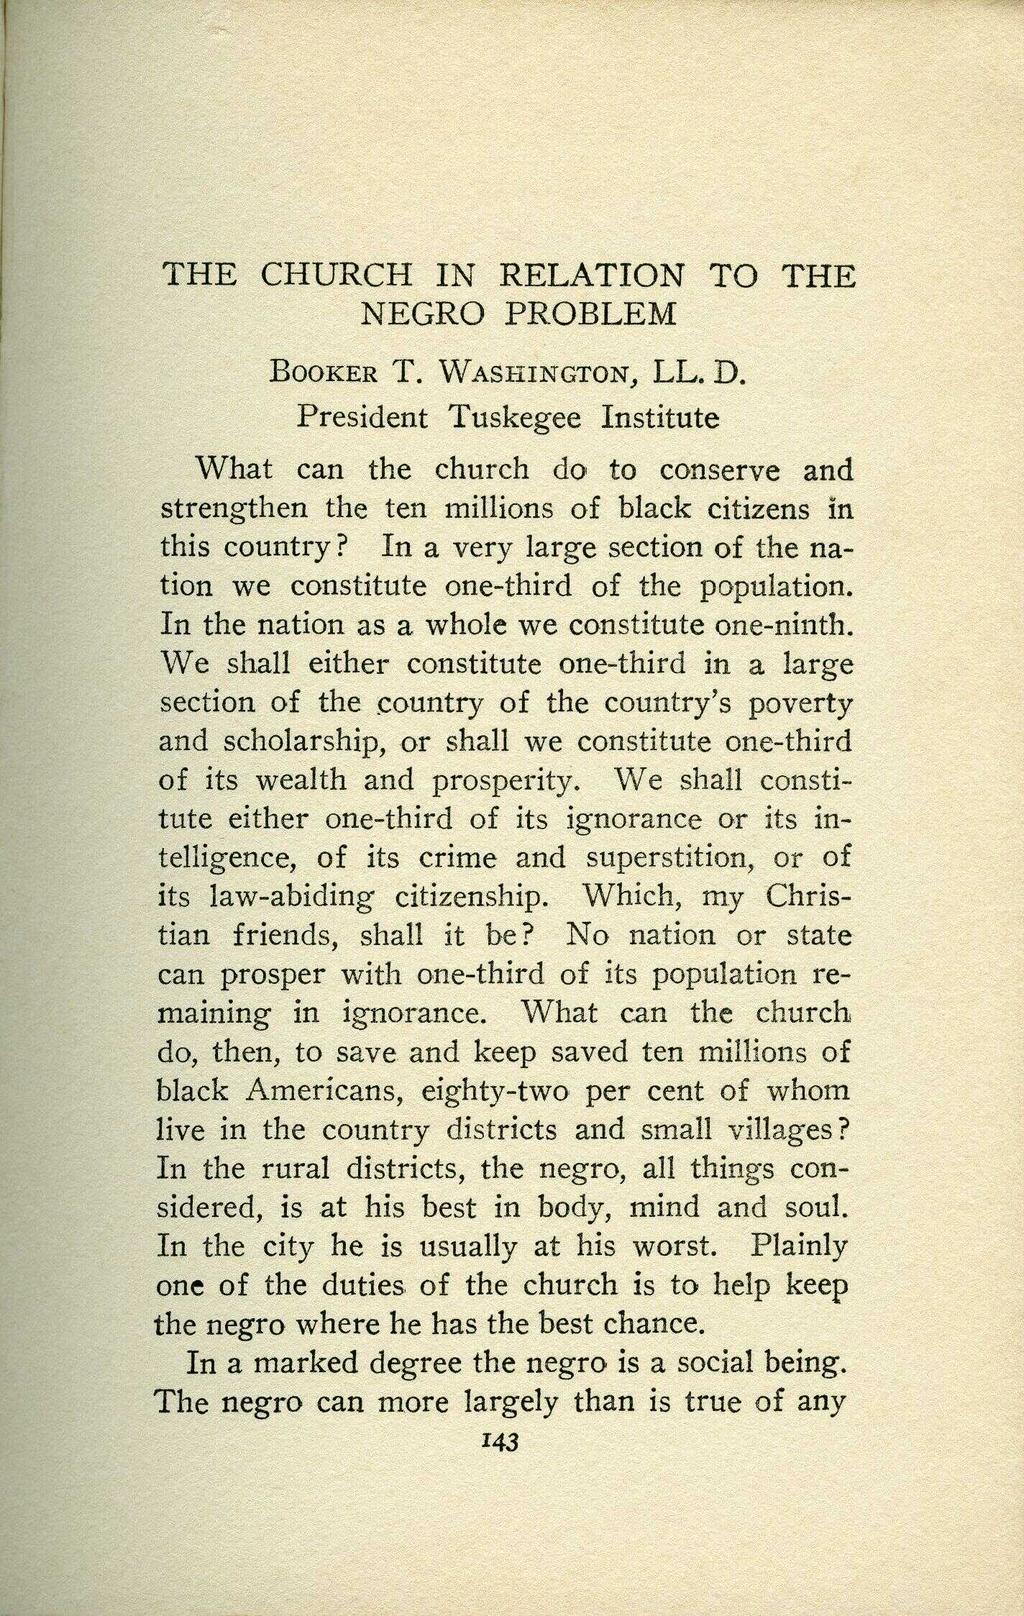 THE CHURCH IN RELATION TO THE NEGRO PROBLEM BOOKER T. WASHIHGTON, LL. D.